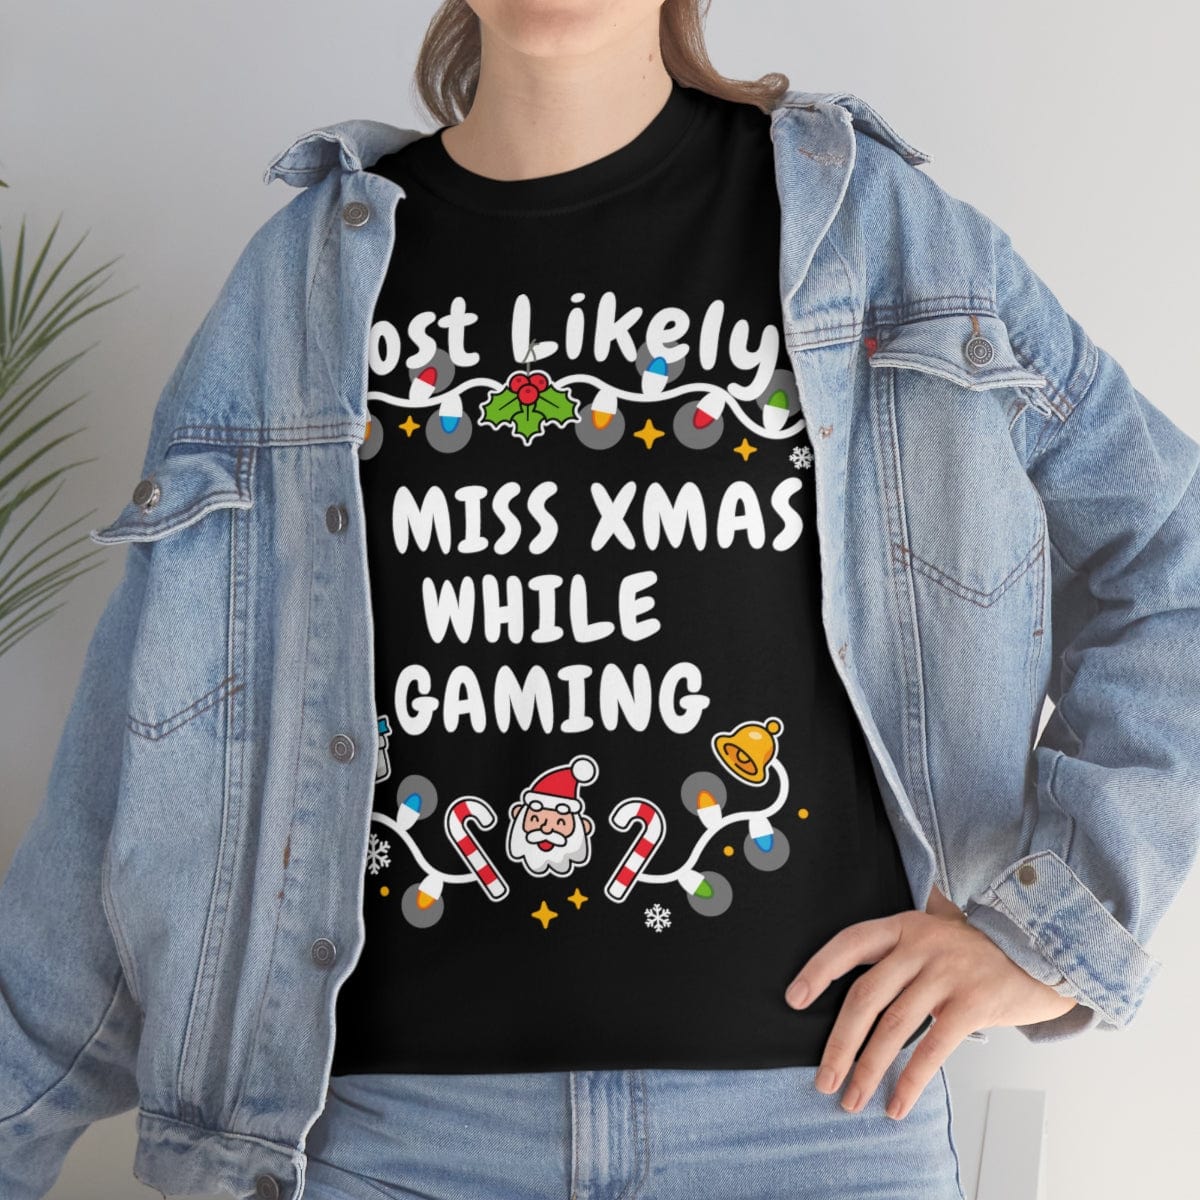 TO MISS XMAS WHILE GAMING